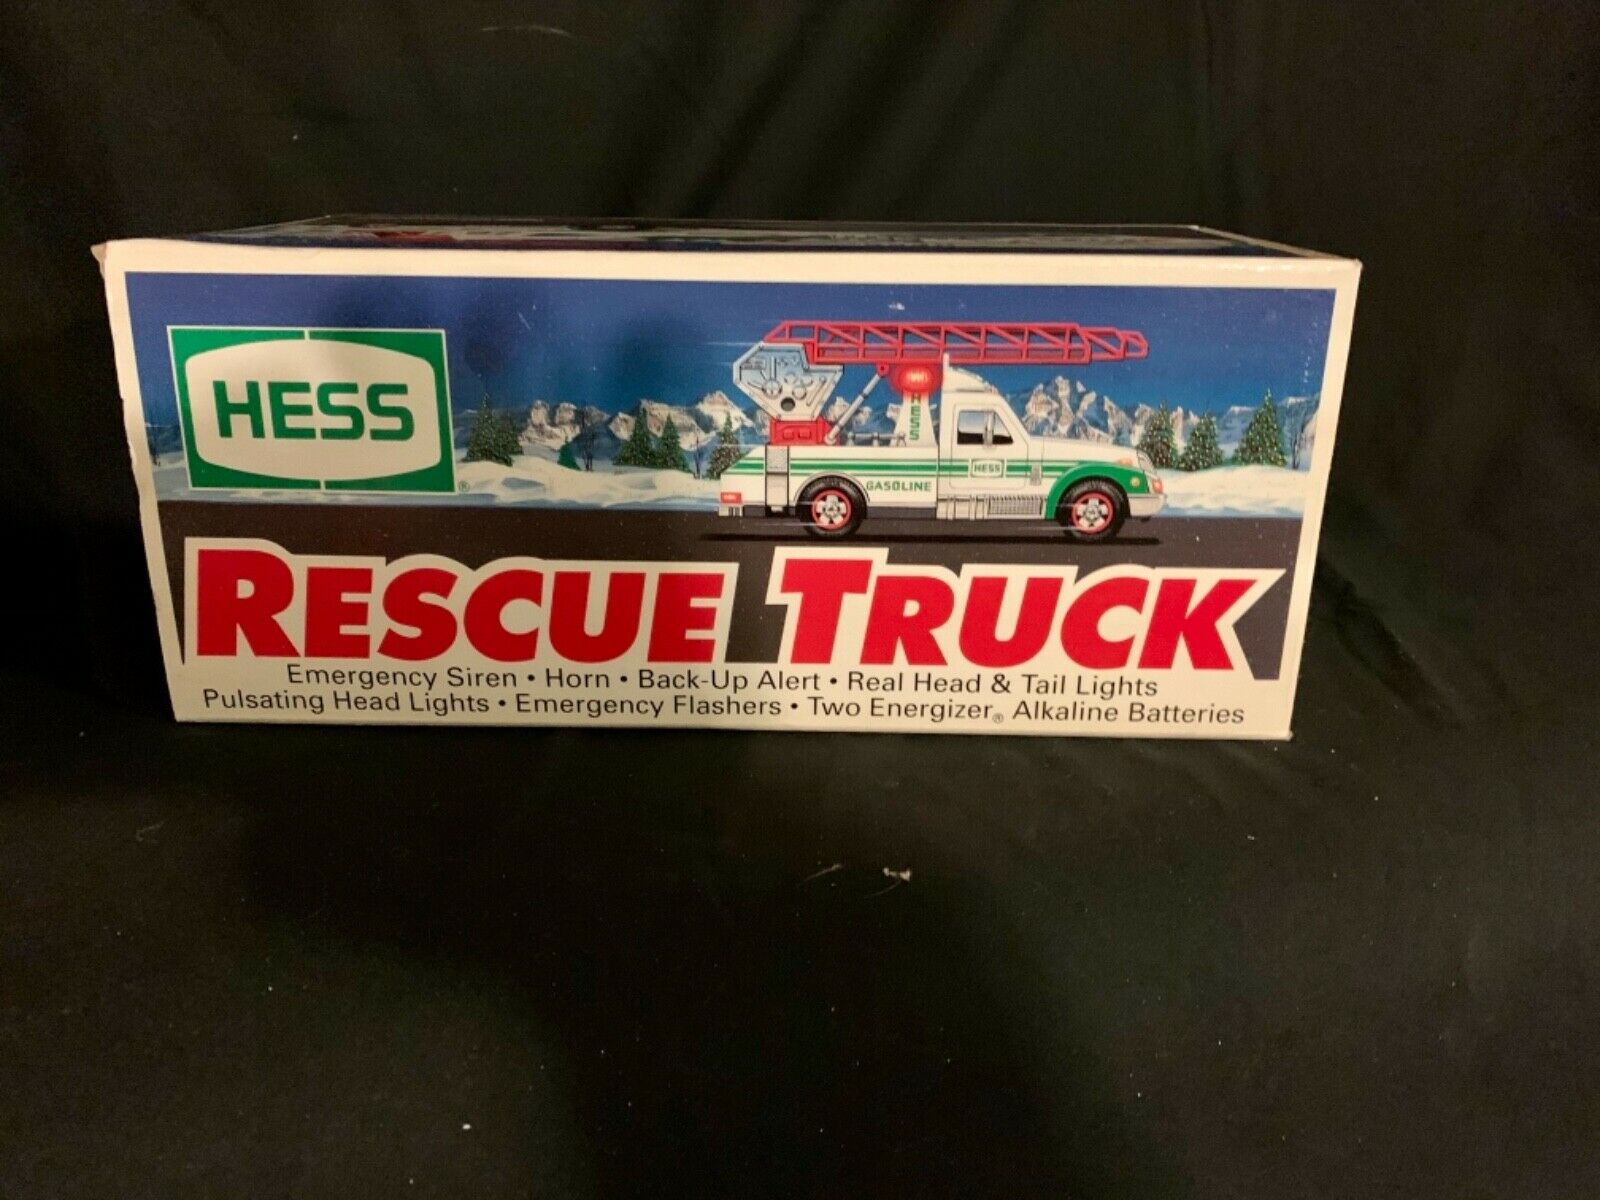 1994 HESS Rescue Truck - Mint Condition - Unopened